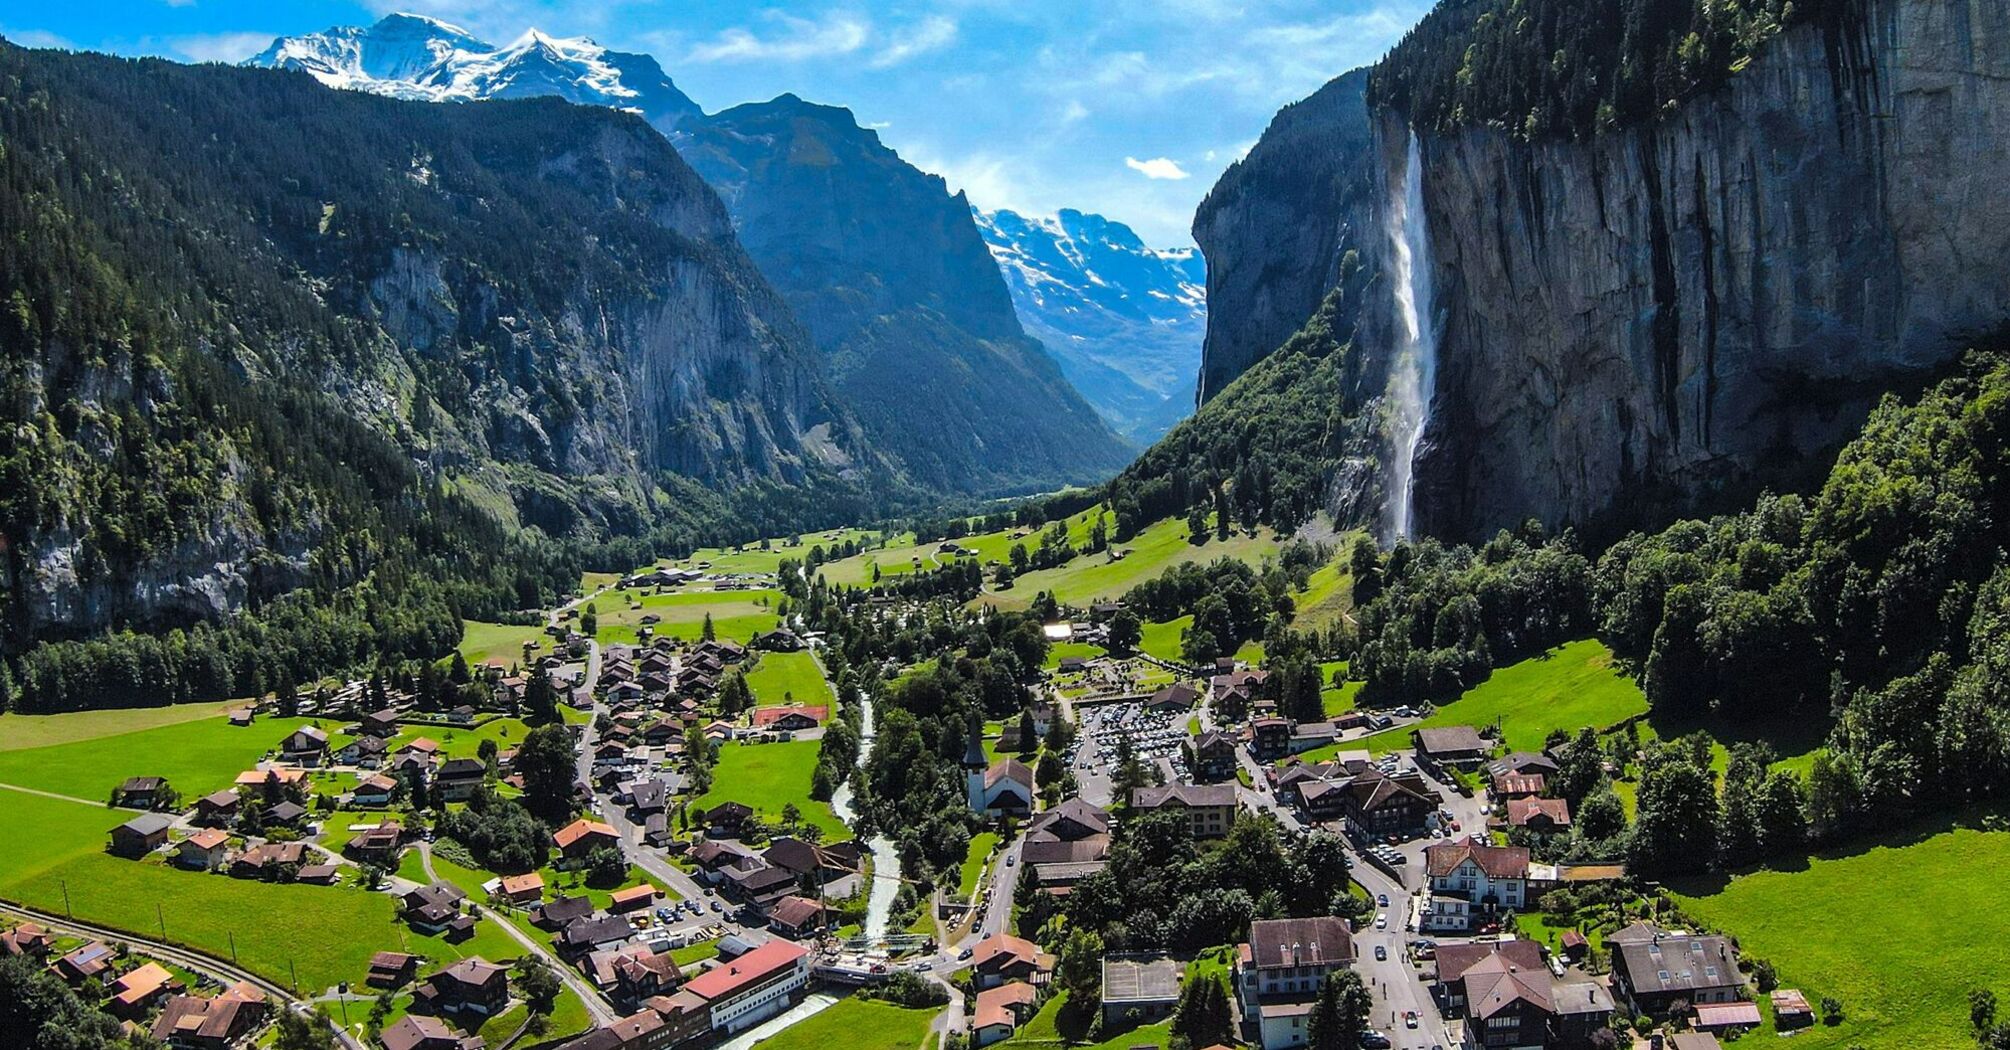 Picturesque view of Lauterbrunnen valley with Staubbach Falls and surrounding mountains